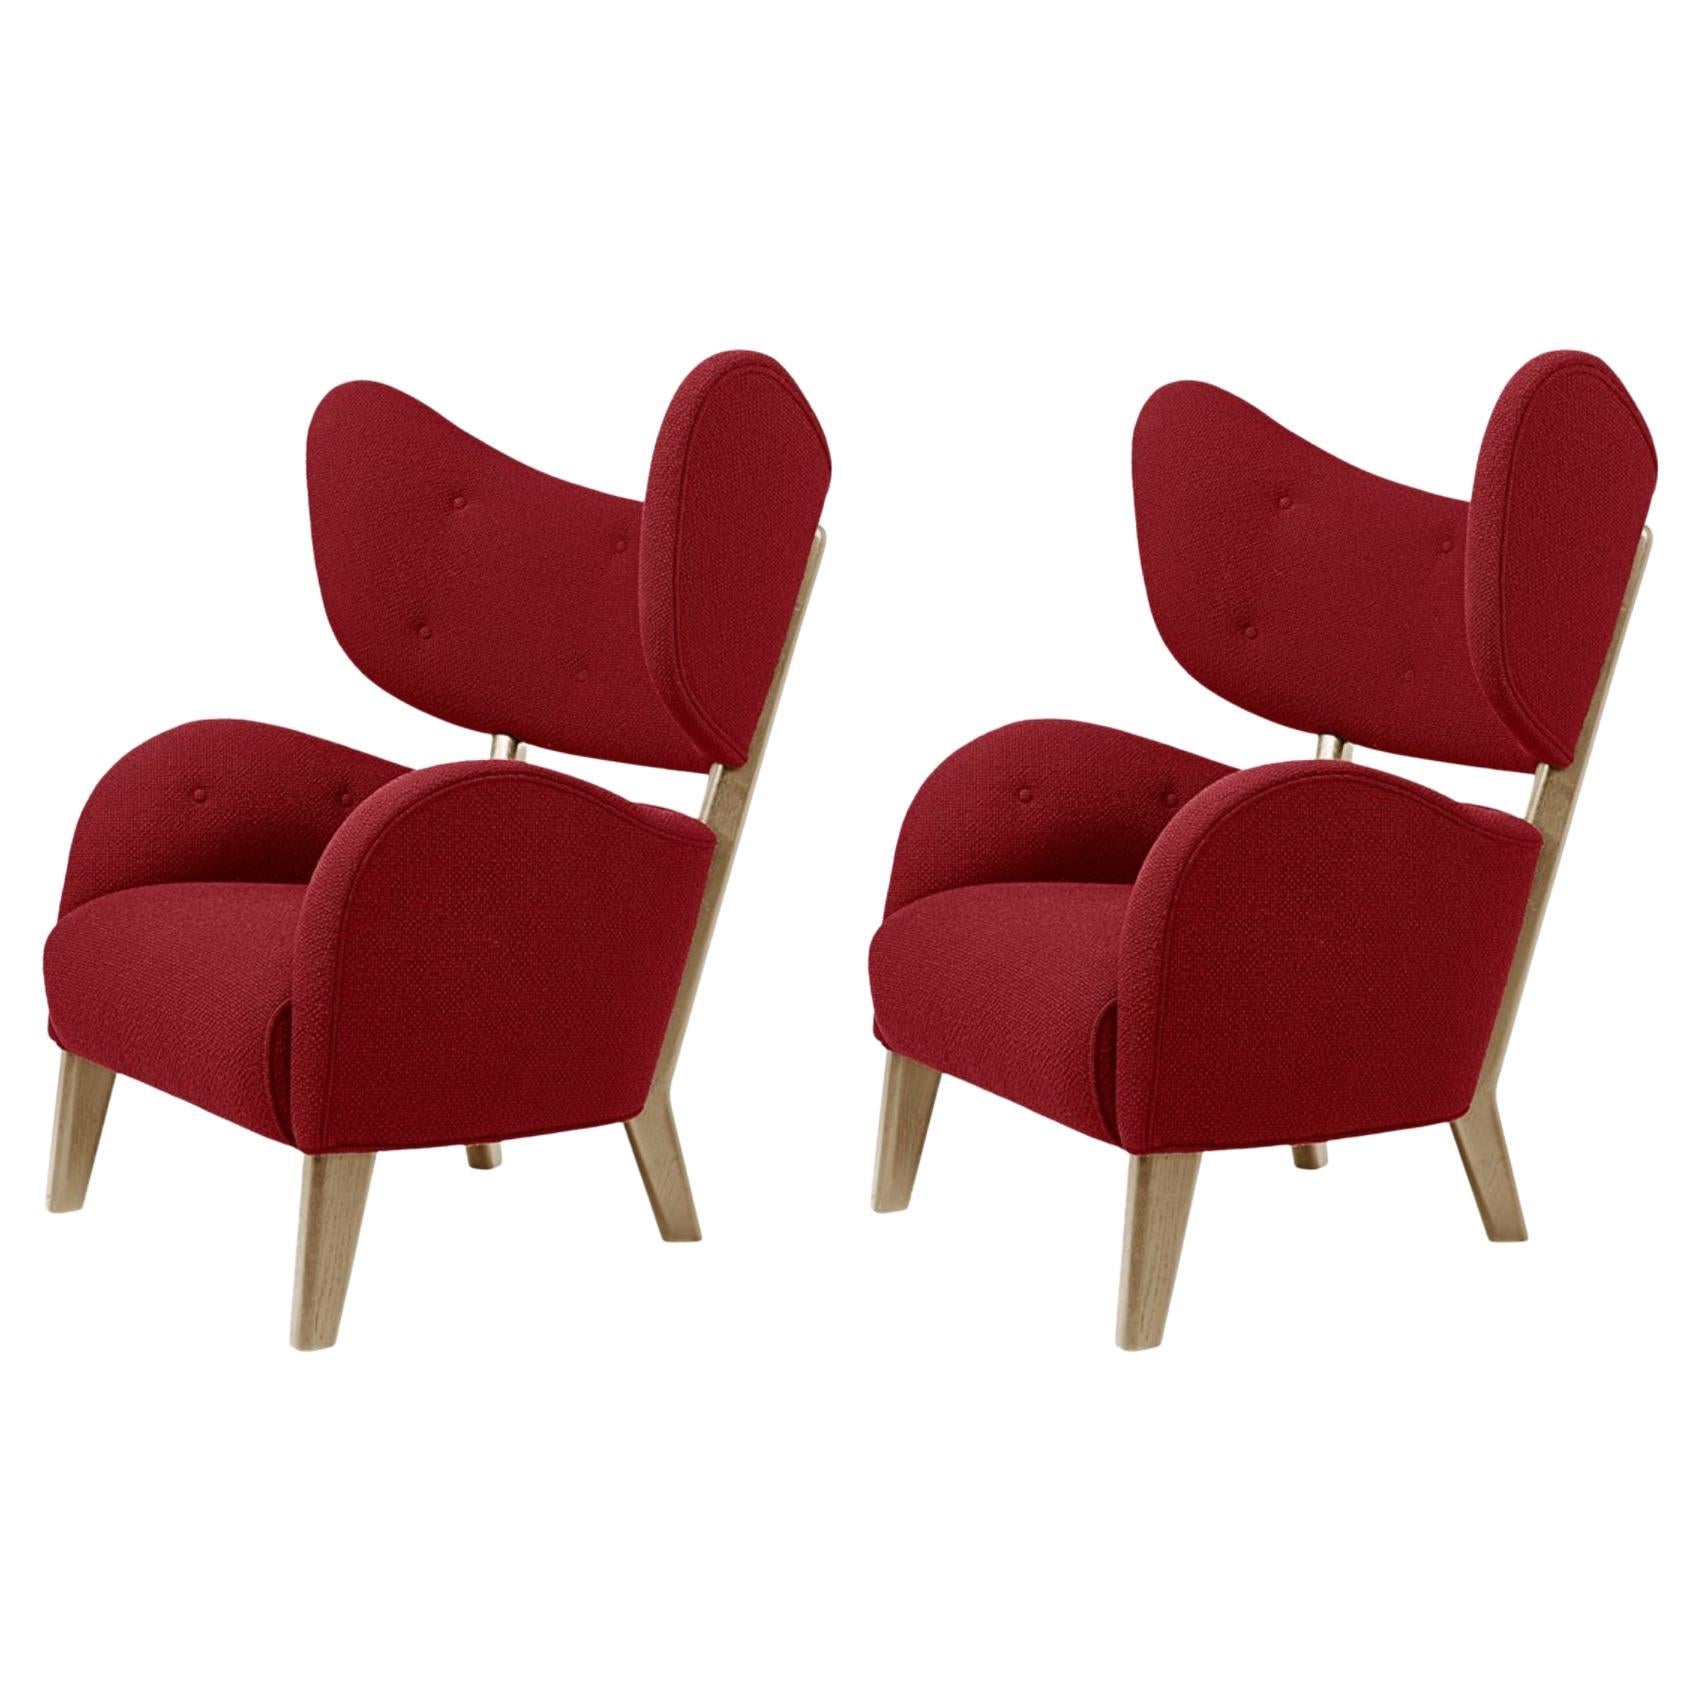 Set of 2 Red Raf Simons Vidar 3 Natural Oak My Own Chair Lounge Chairs by Lassen